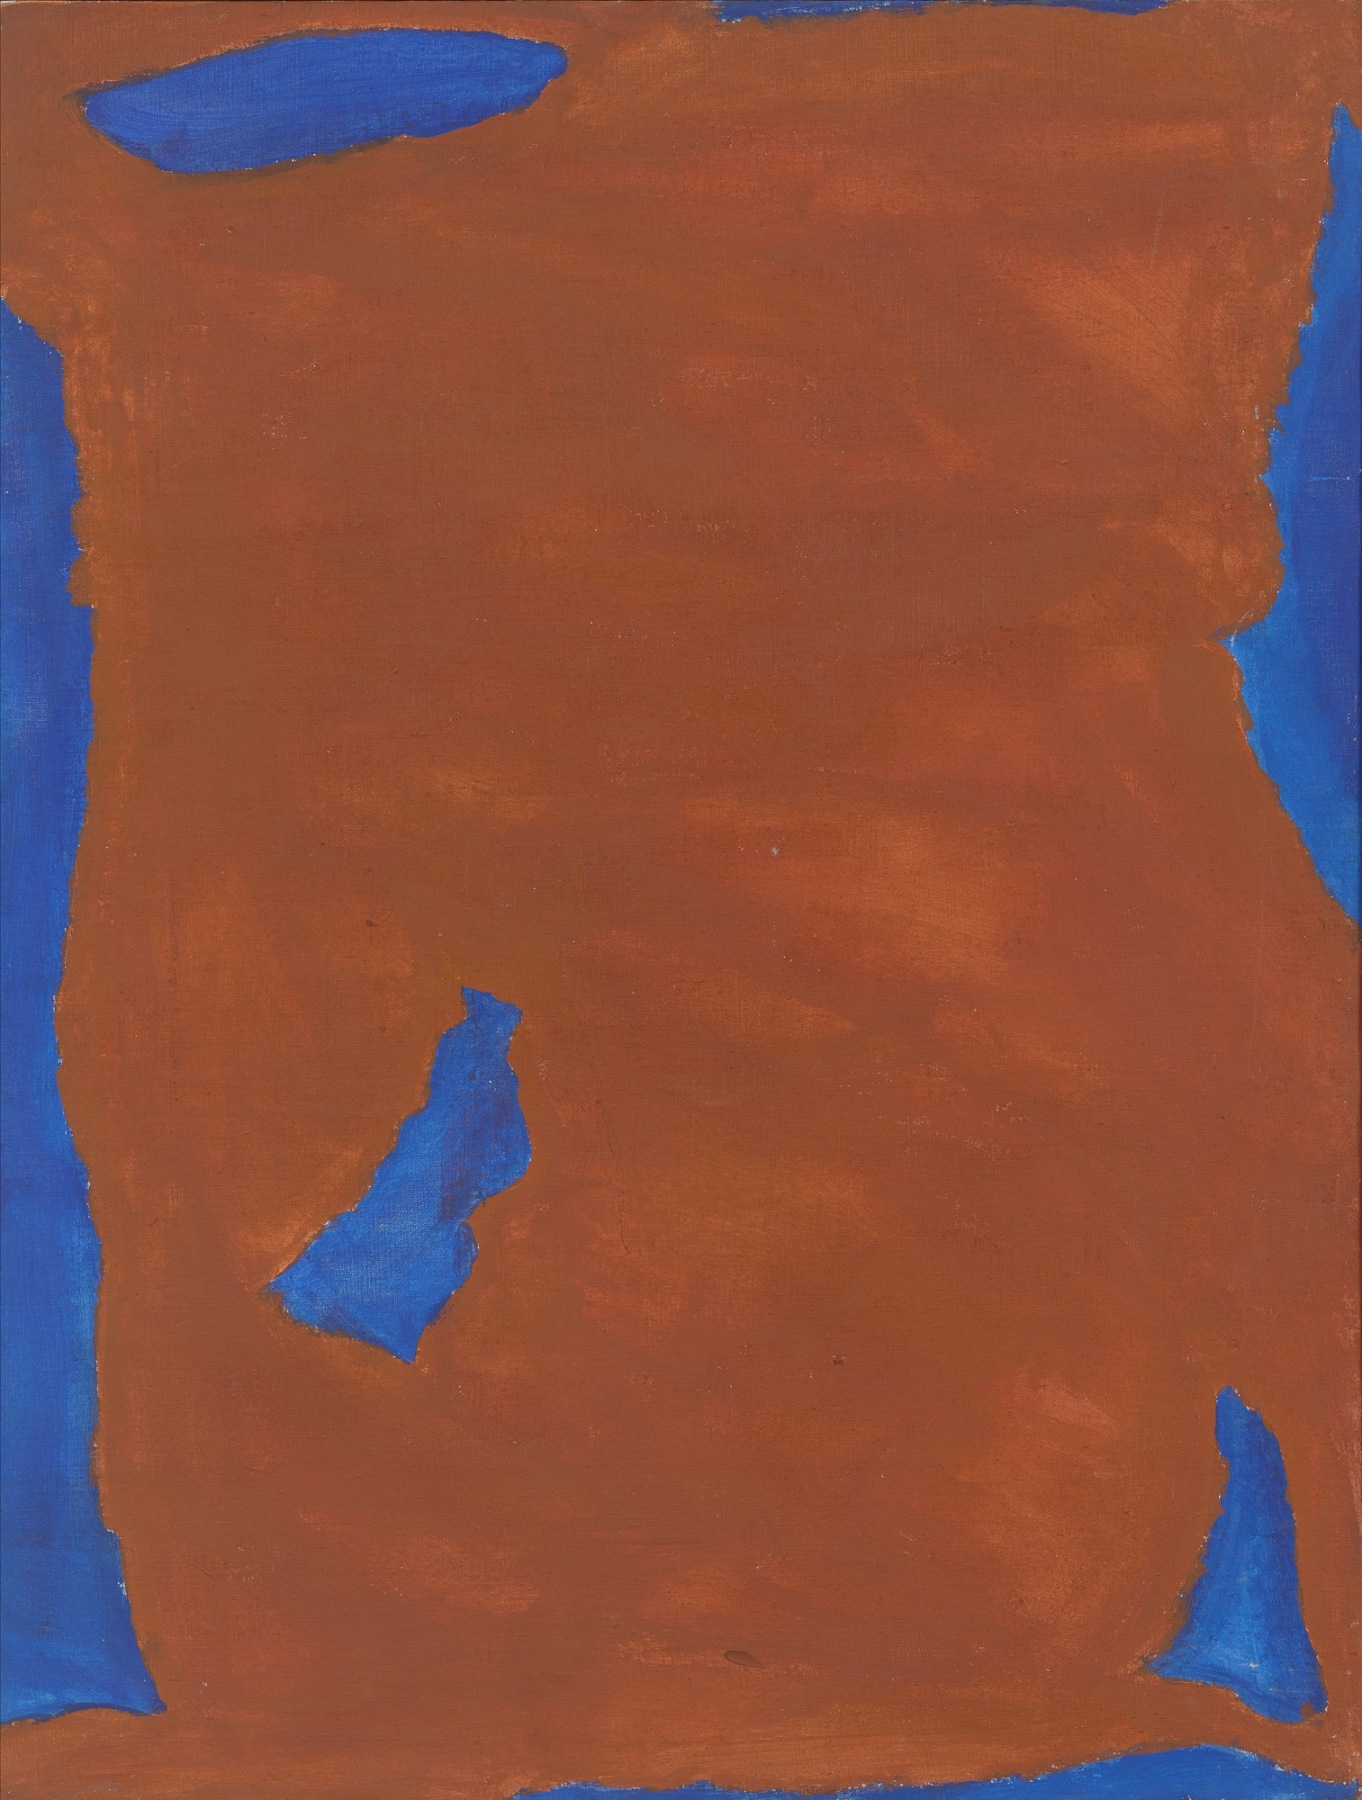 Betty Parsons, Brick in the Sky, 1968